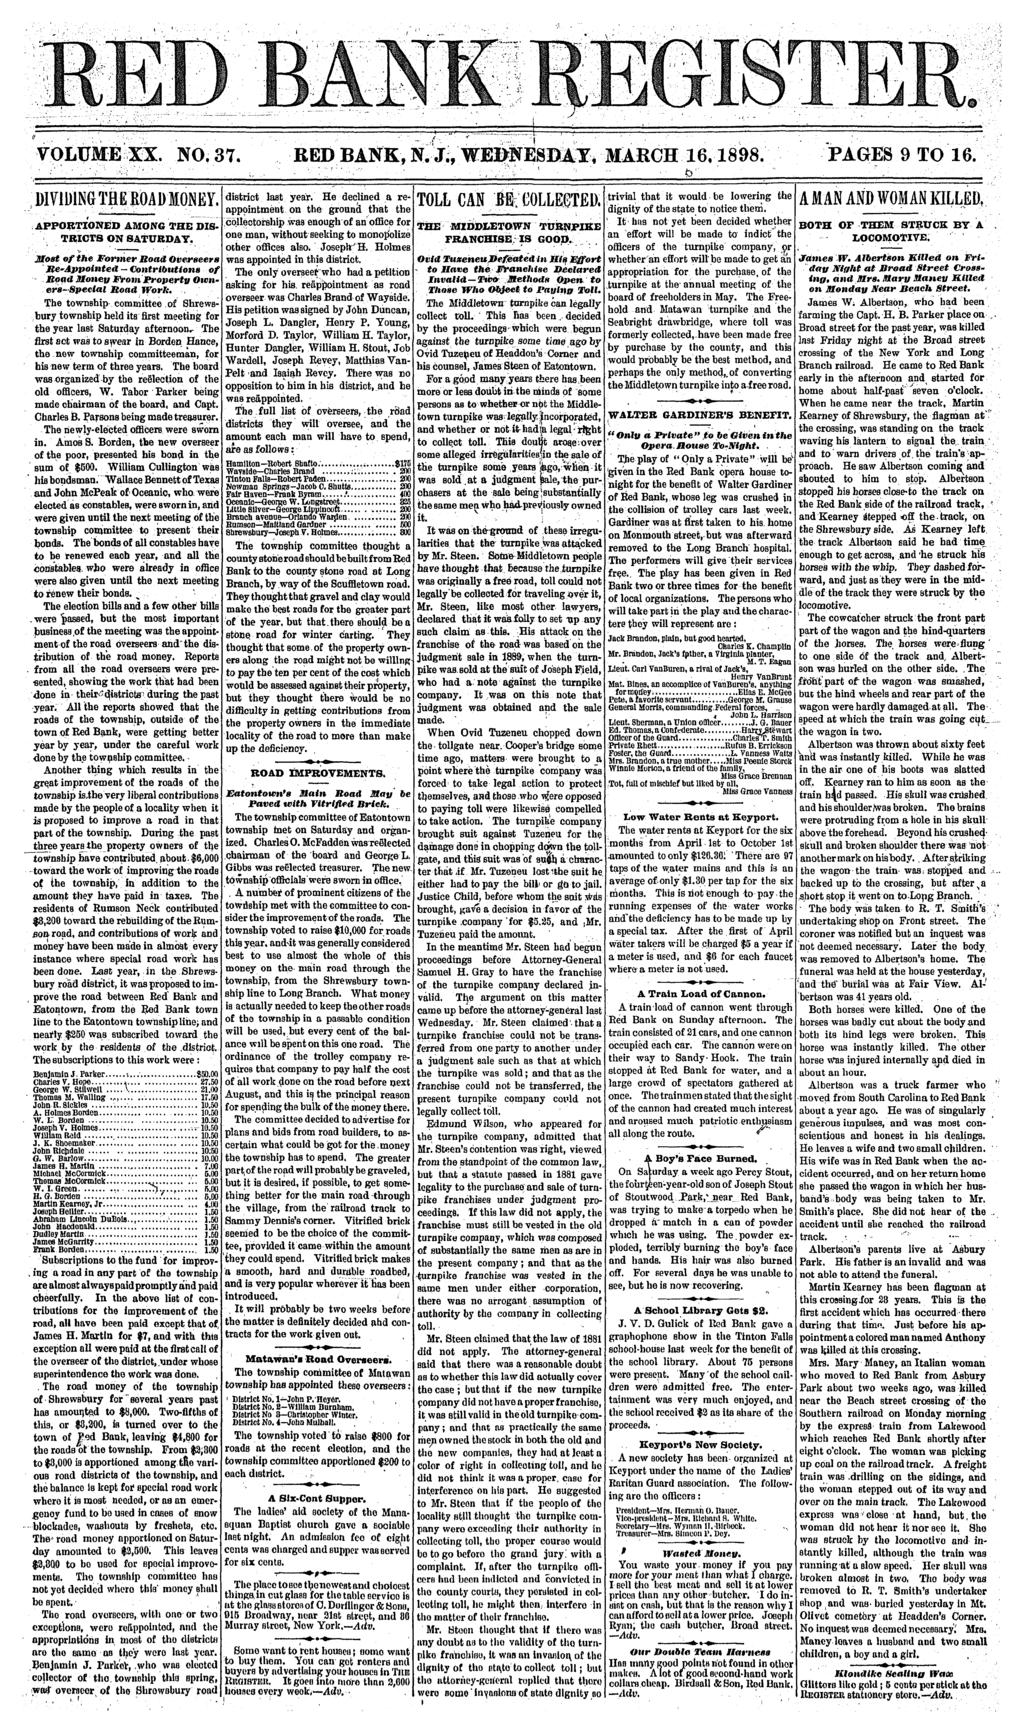 VOLUME XX. NO. 37. RED BANK, N. J., WE1XNESDA.Y, MARCH 16,1898. PAGES 9 O 16. DVDNG HE ROAD MONEY. APPORONED AMONG HE DS- RCS ON SAURDAY.